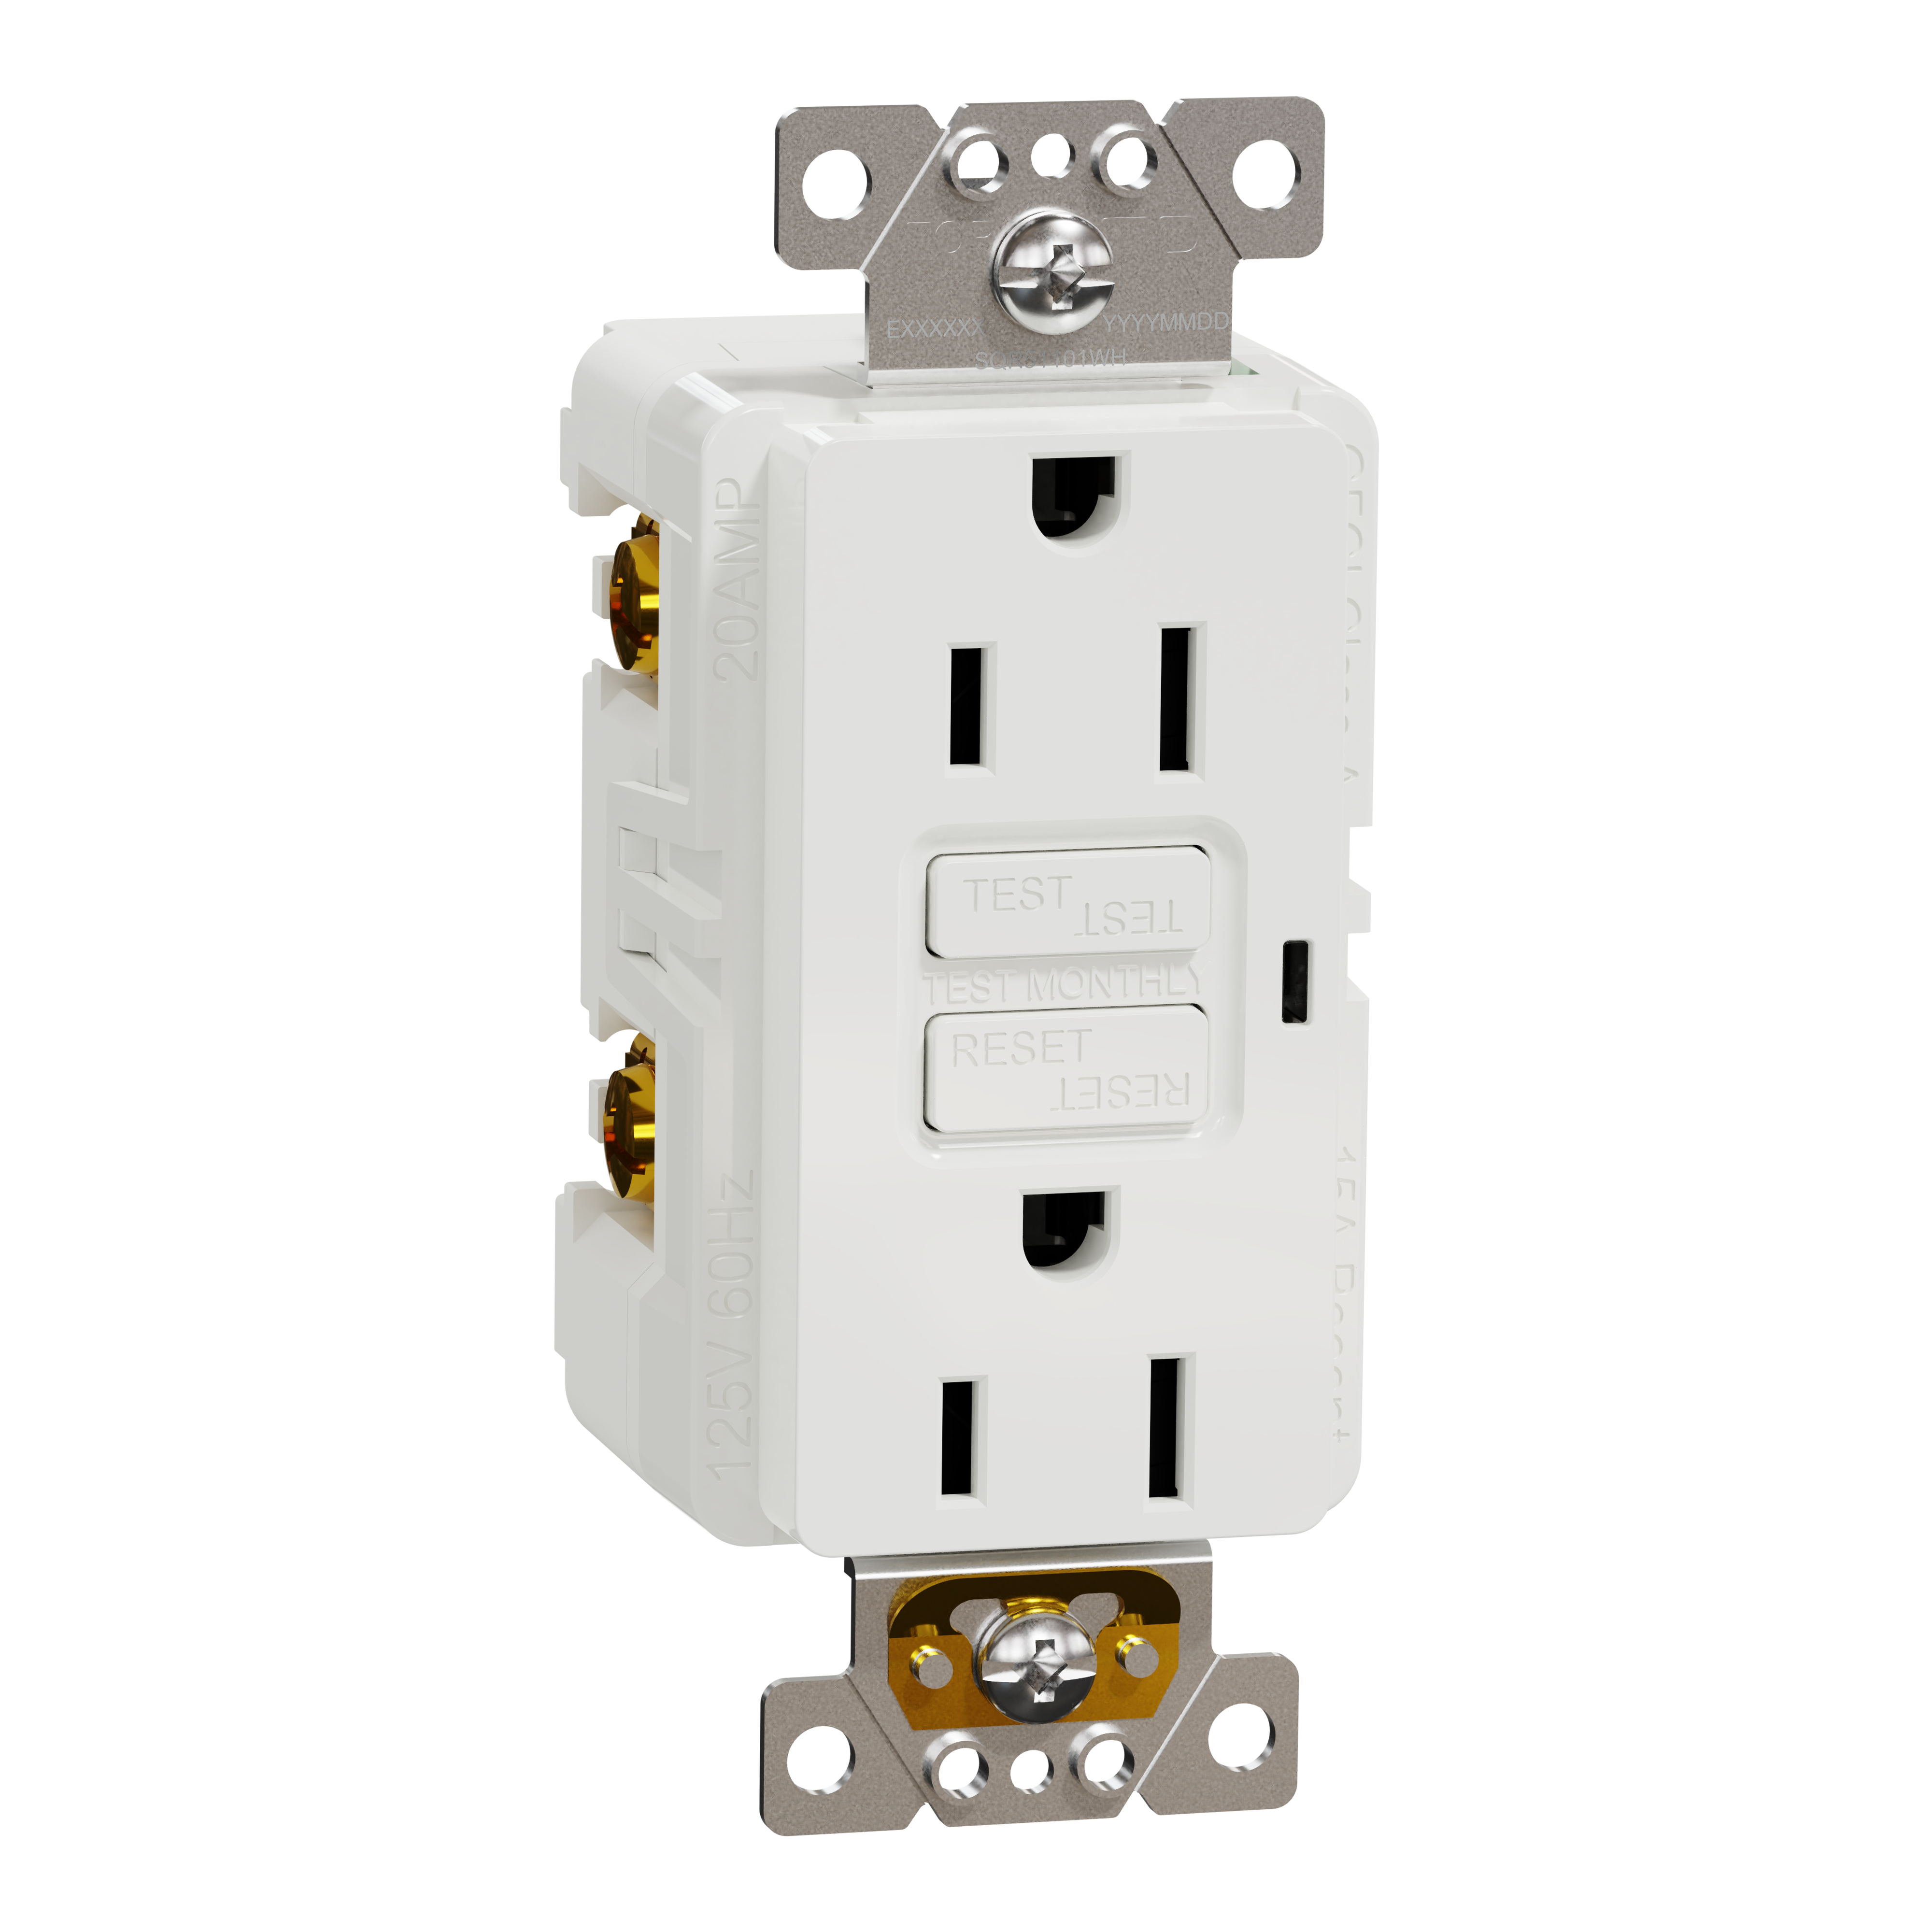 Socket-outlet, X Series, 15A, decorator, GFCI, tamper resistant, residential, white, matte finish